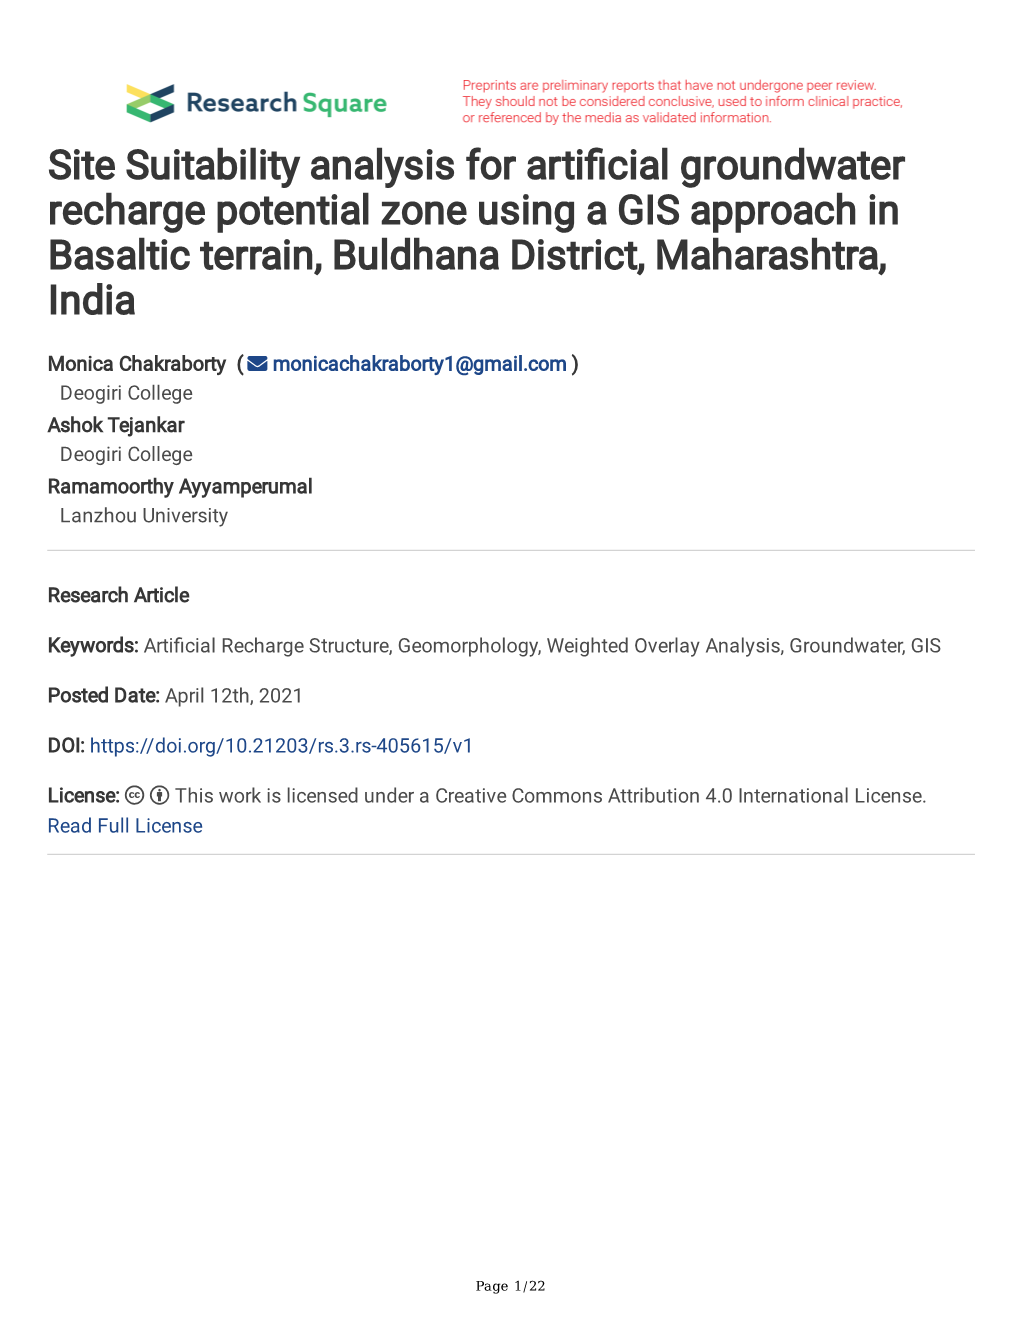 Site Suitability Analysis for Arti Cial Groundwater Recharge Potential